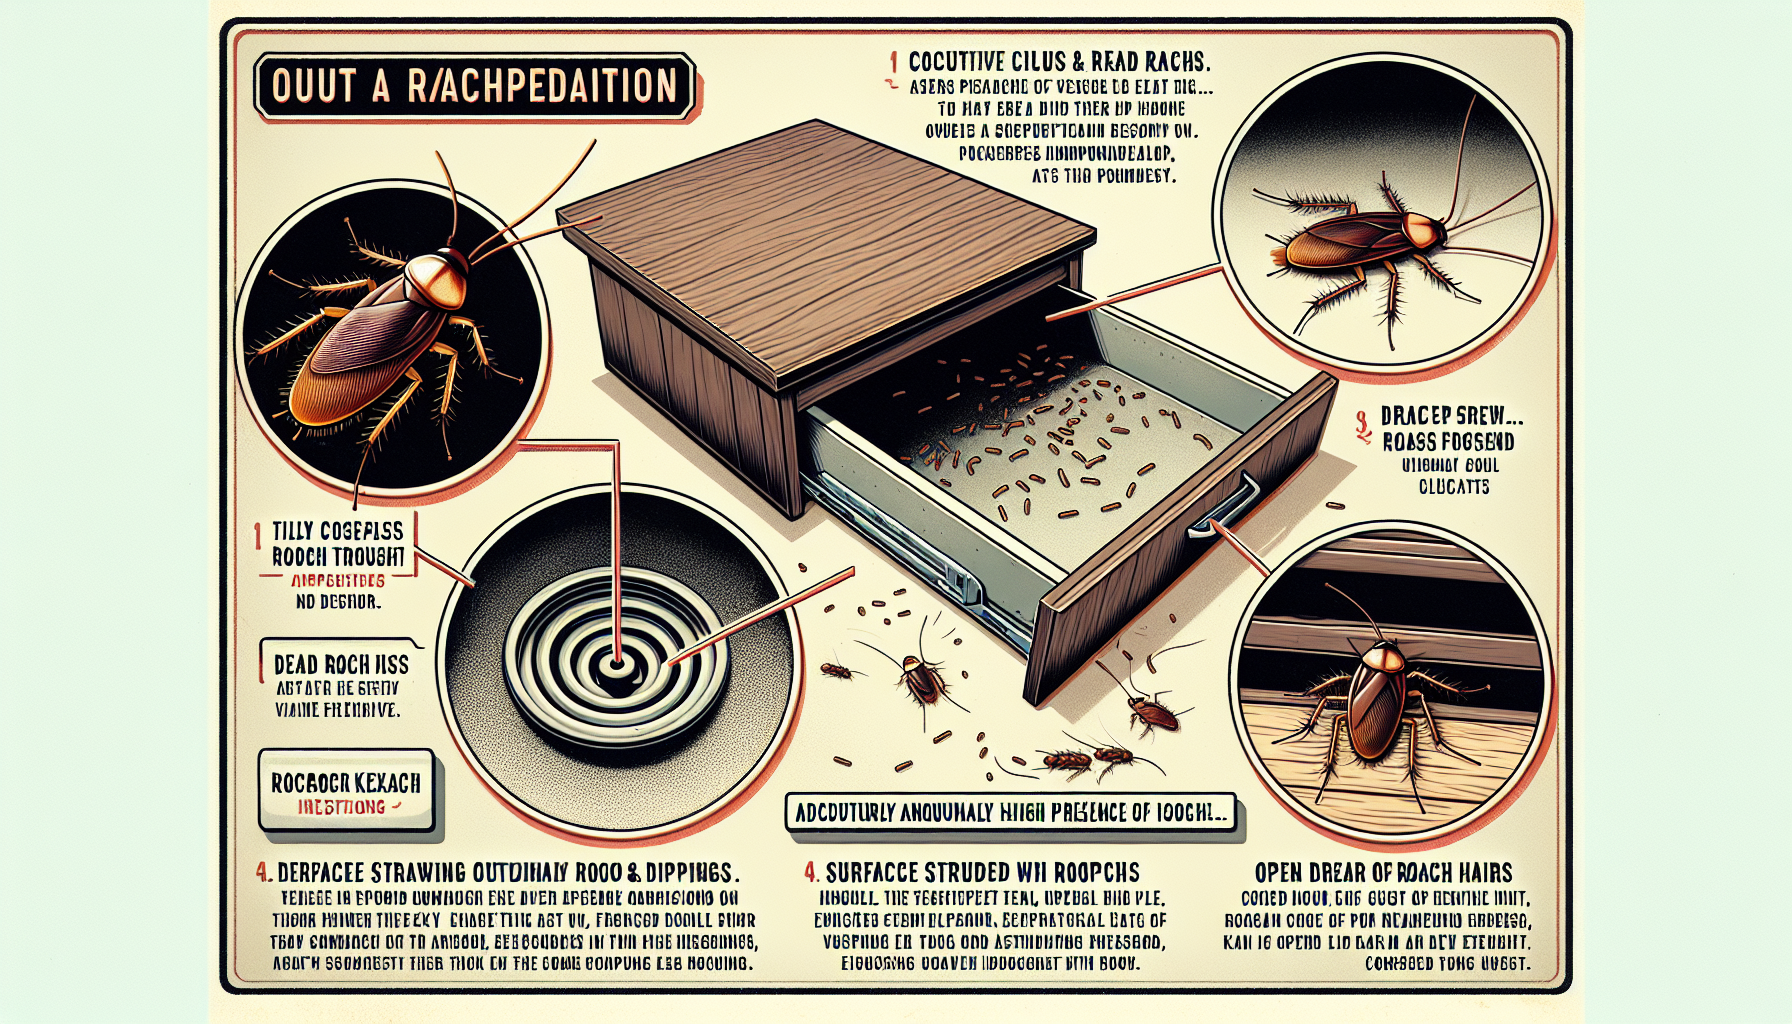 Signs of Roach Infestation: How to Identify and Avoid Them